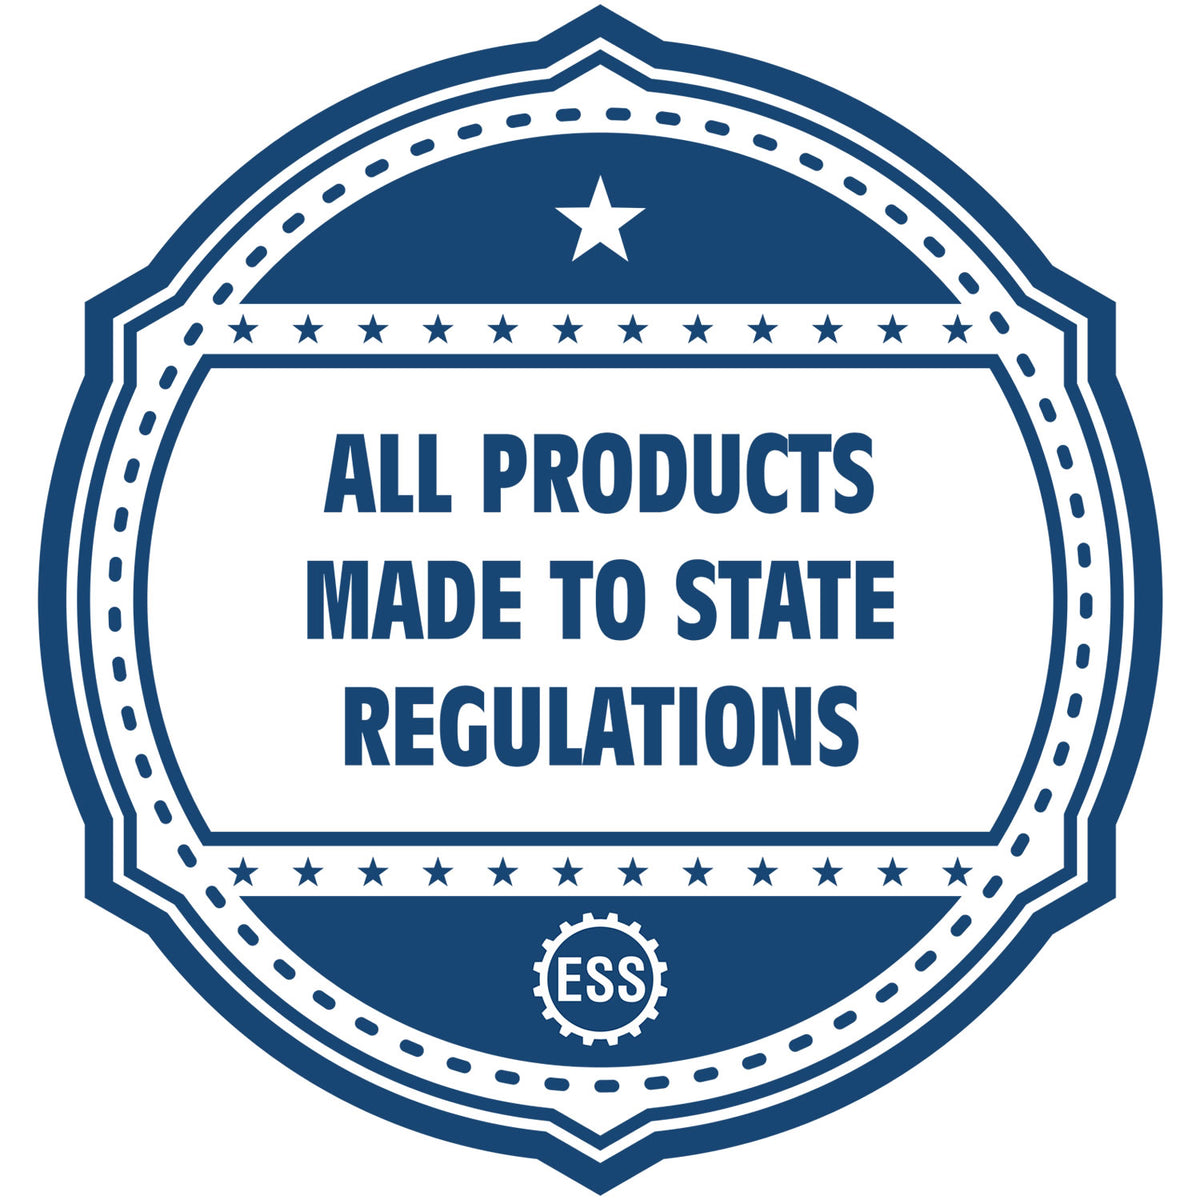 An icon or badge element for the State of Hawaii Long Reach Architectural Embossing Seal showing that this product is made in compliance with state regulations.